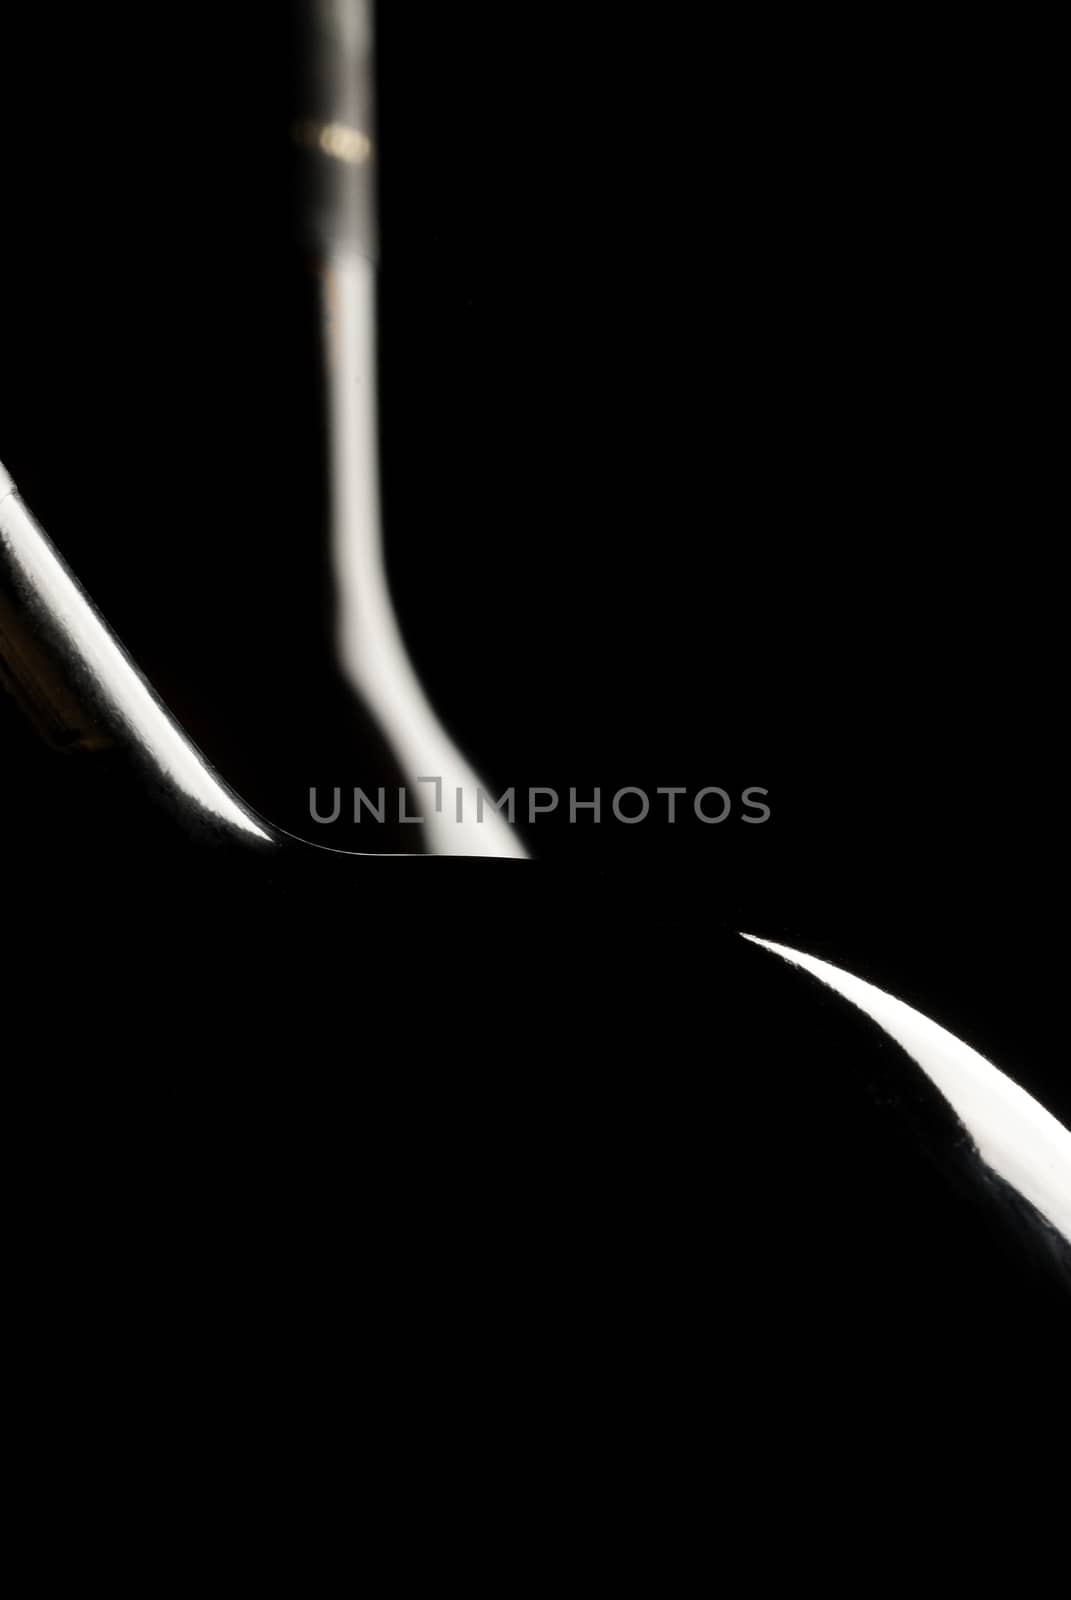 Silhouette of wine bottle, black background, two bottles of wine by jalonsohu@gmail.com